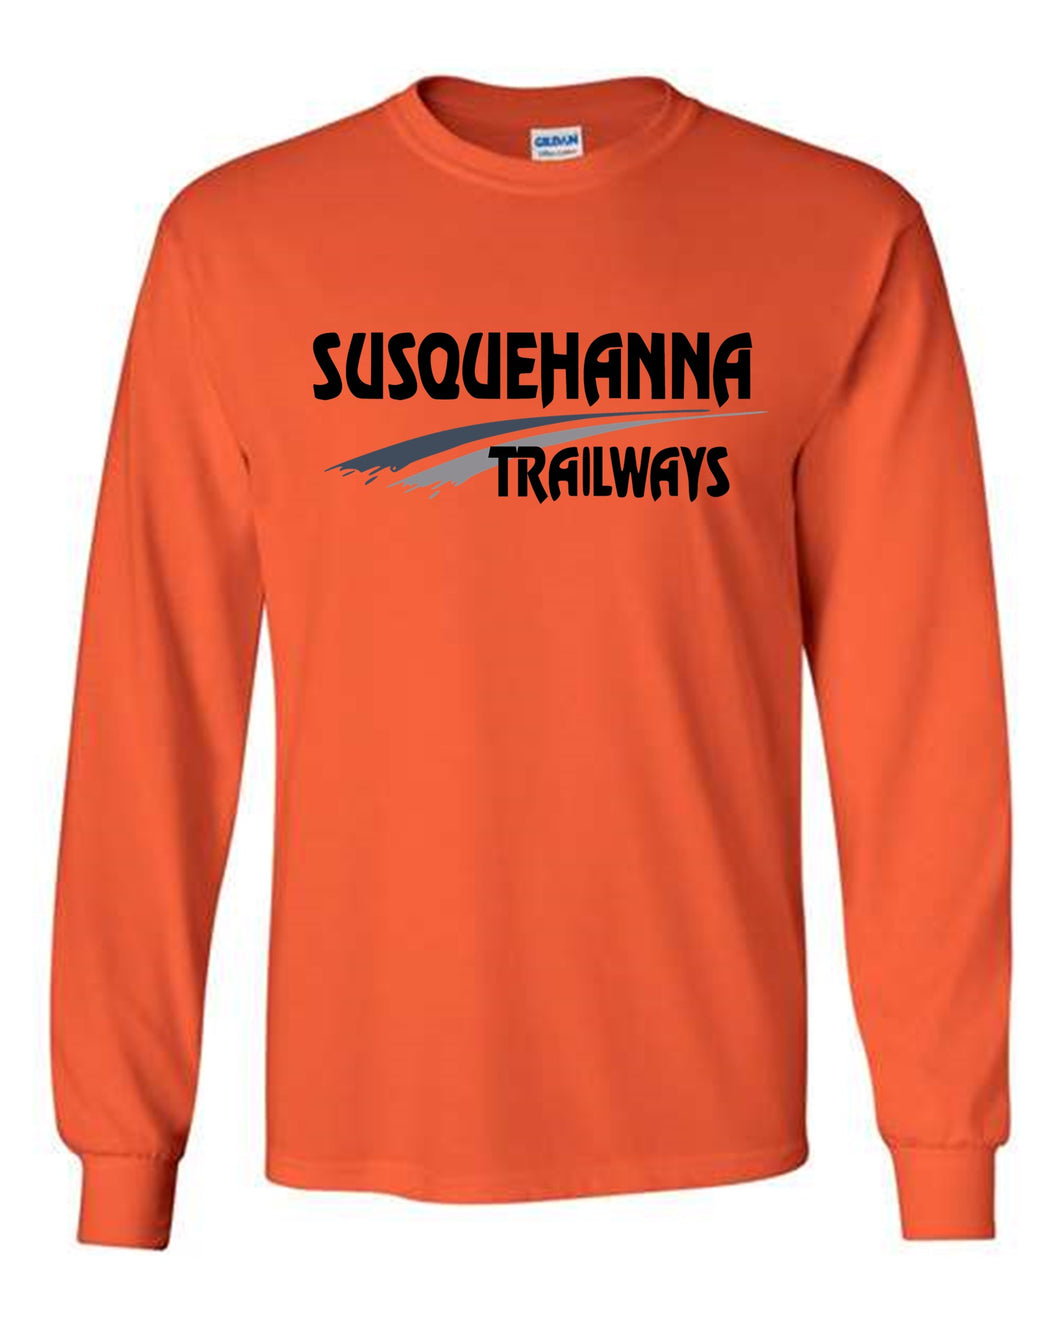 Susquehanna Trailways Long Sleeve - Adult Sizes Only